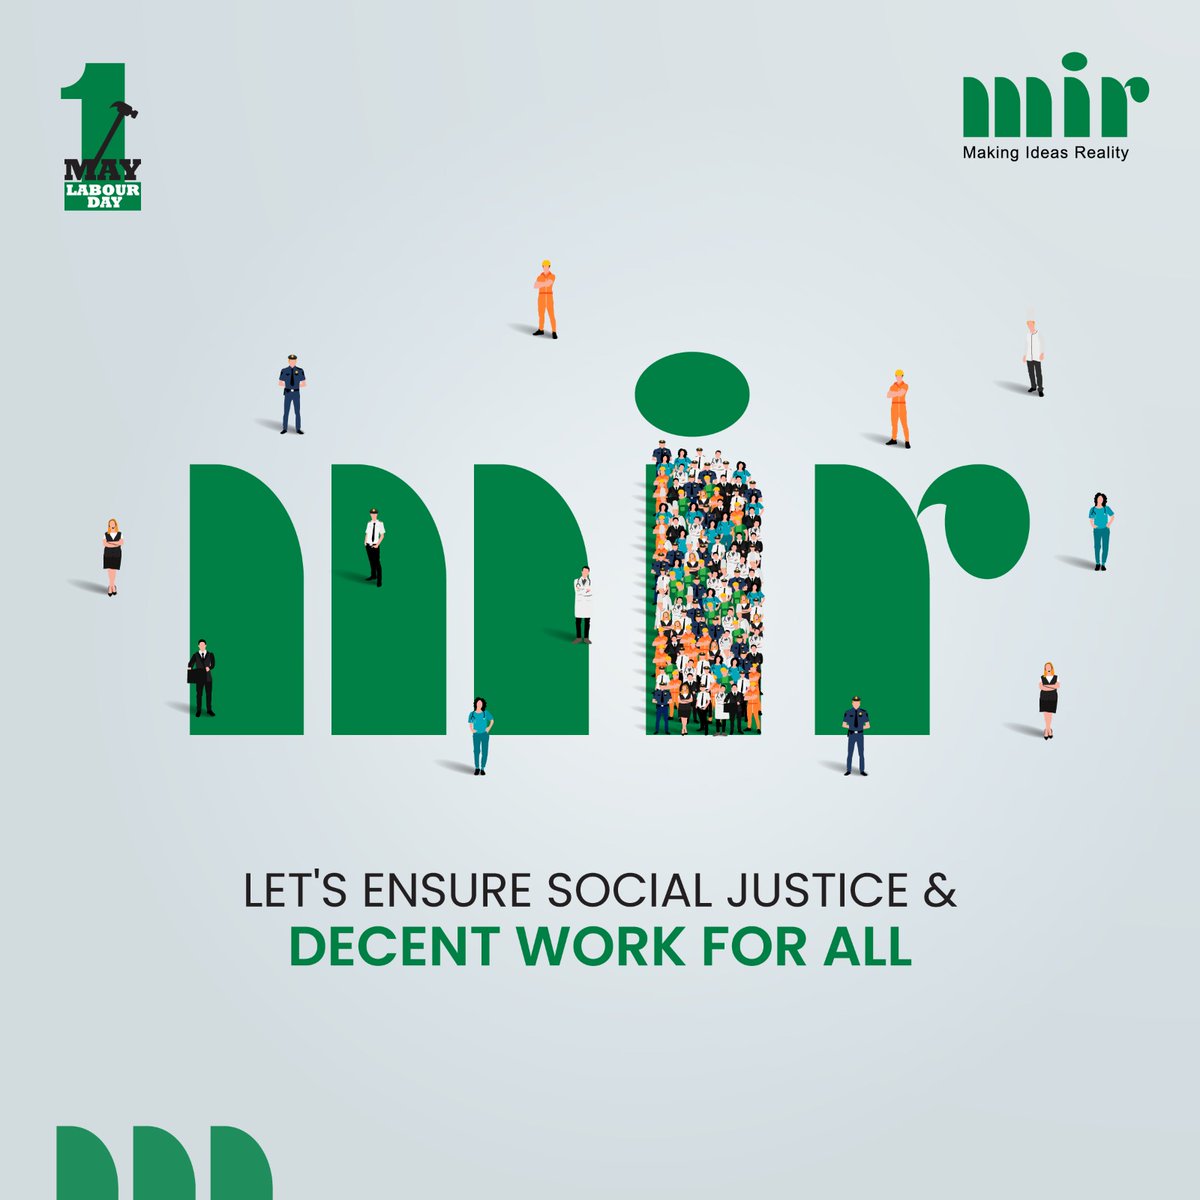 Happy International Labor Day from the Mir Group of Companies! We celebrate the hard work and dedication of our employees who make it happen every day. Let's continue striving for a better future for all workers! 

#MirGroup #MG #MakingIdeasReality
#MayDay #laborday #labor